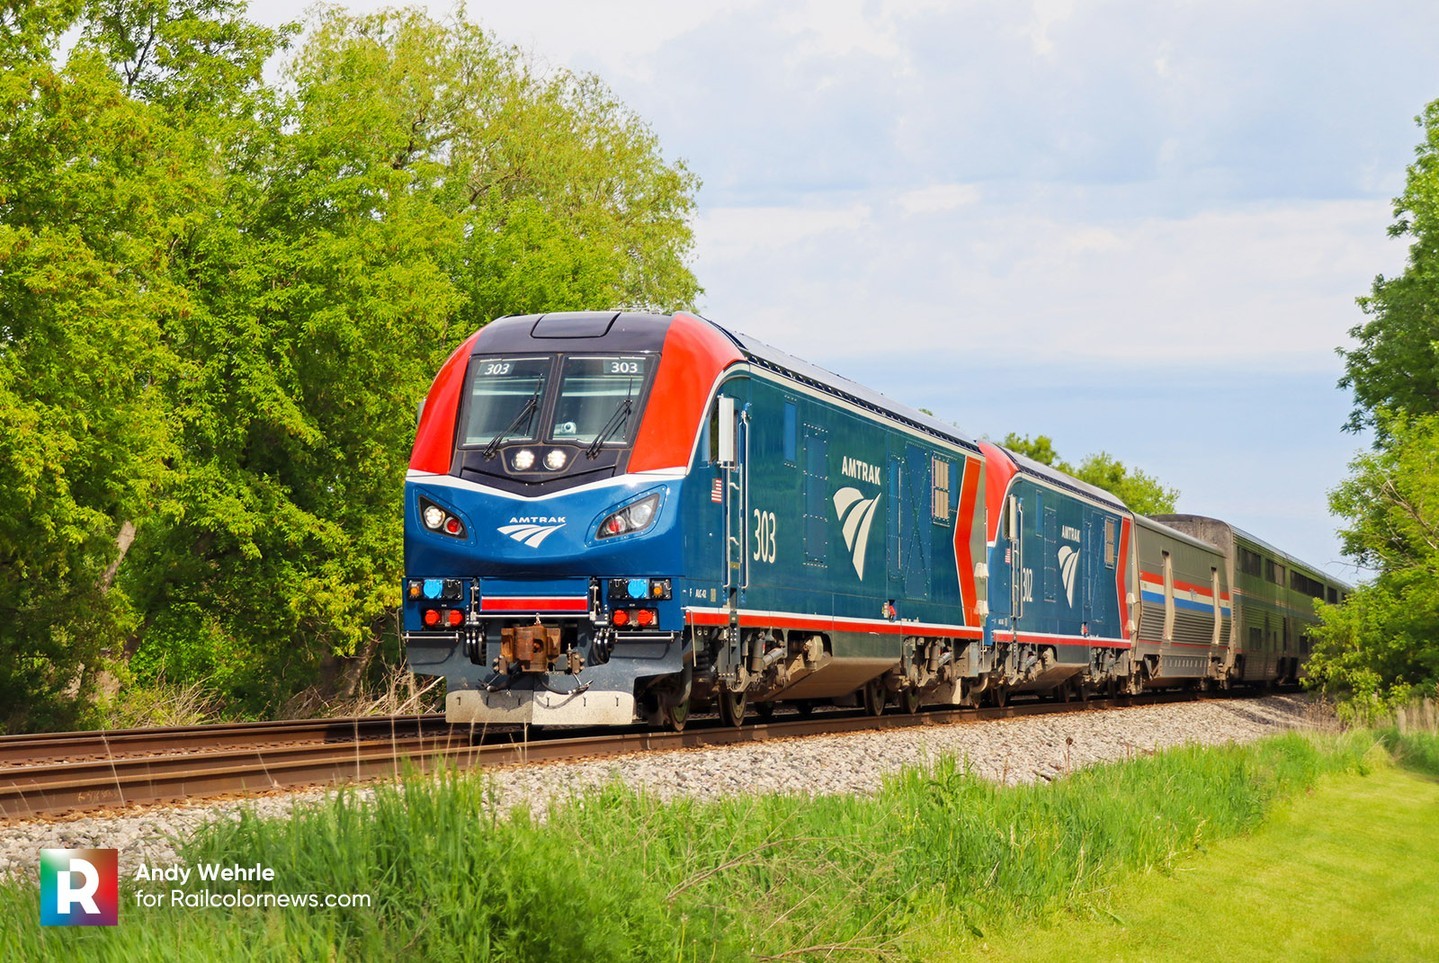 📷 by Andy Wehrle 🇺🇸 It is official: Amtrak orders 50 more long-distance Chargers ⬆️Find out more on RailcolorNews.com 👍
.
.
.
.
.
#Siemens #SiemensCharger #SiemensALC42 #ALC42 #ChargerALC42 #ChargerLocomotive #Diesellocomotive #railroad #railfanning #Amtrak #railroadphotography #trains #railcolornews #railcolor #AL42302 #AL42303 #railroads #railroading #railroadphotography #railroadlife #railfanning_america #railroads_of_the_usa #railroads_of_america #302 #303 #EmpireBuilder #AmtrakEmpireBuilder